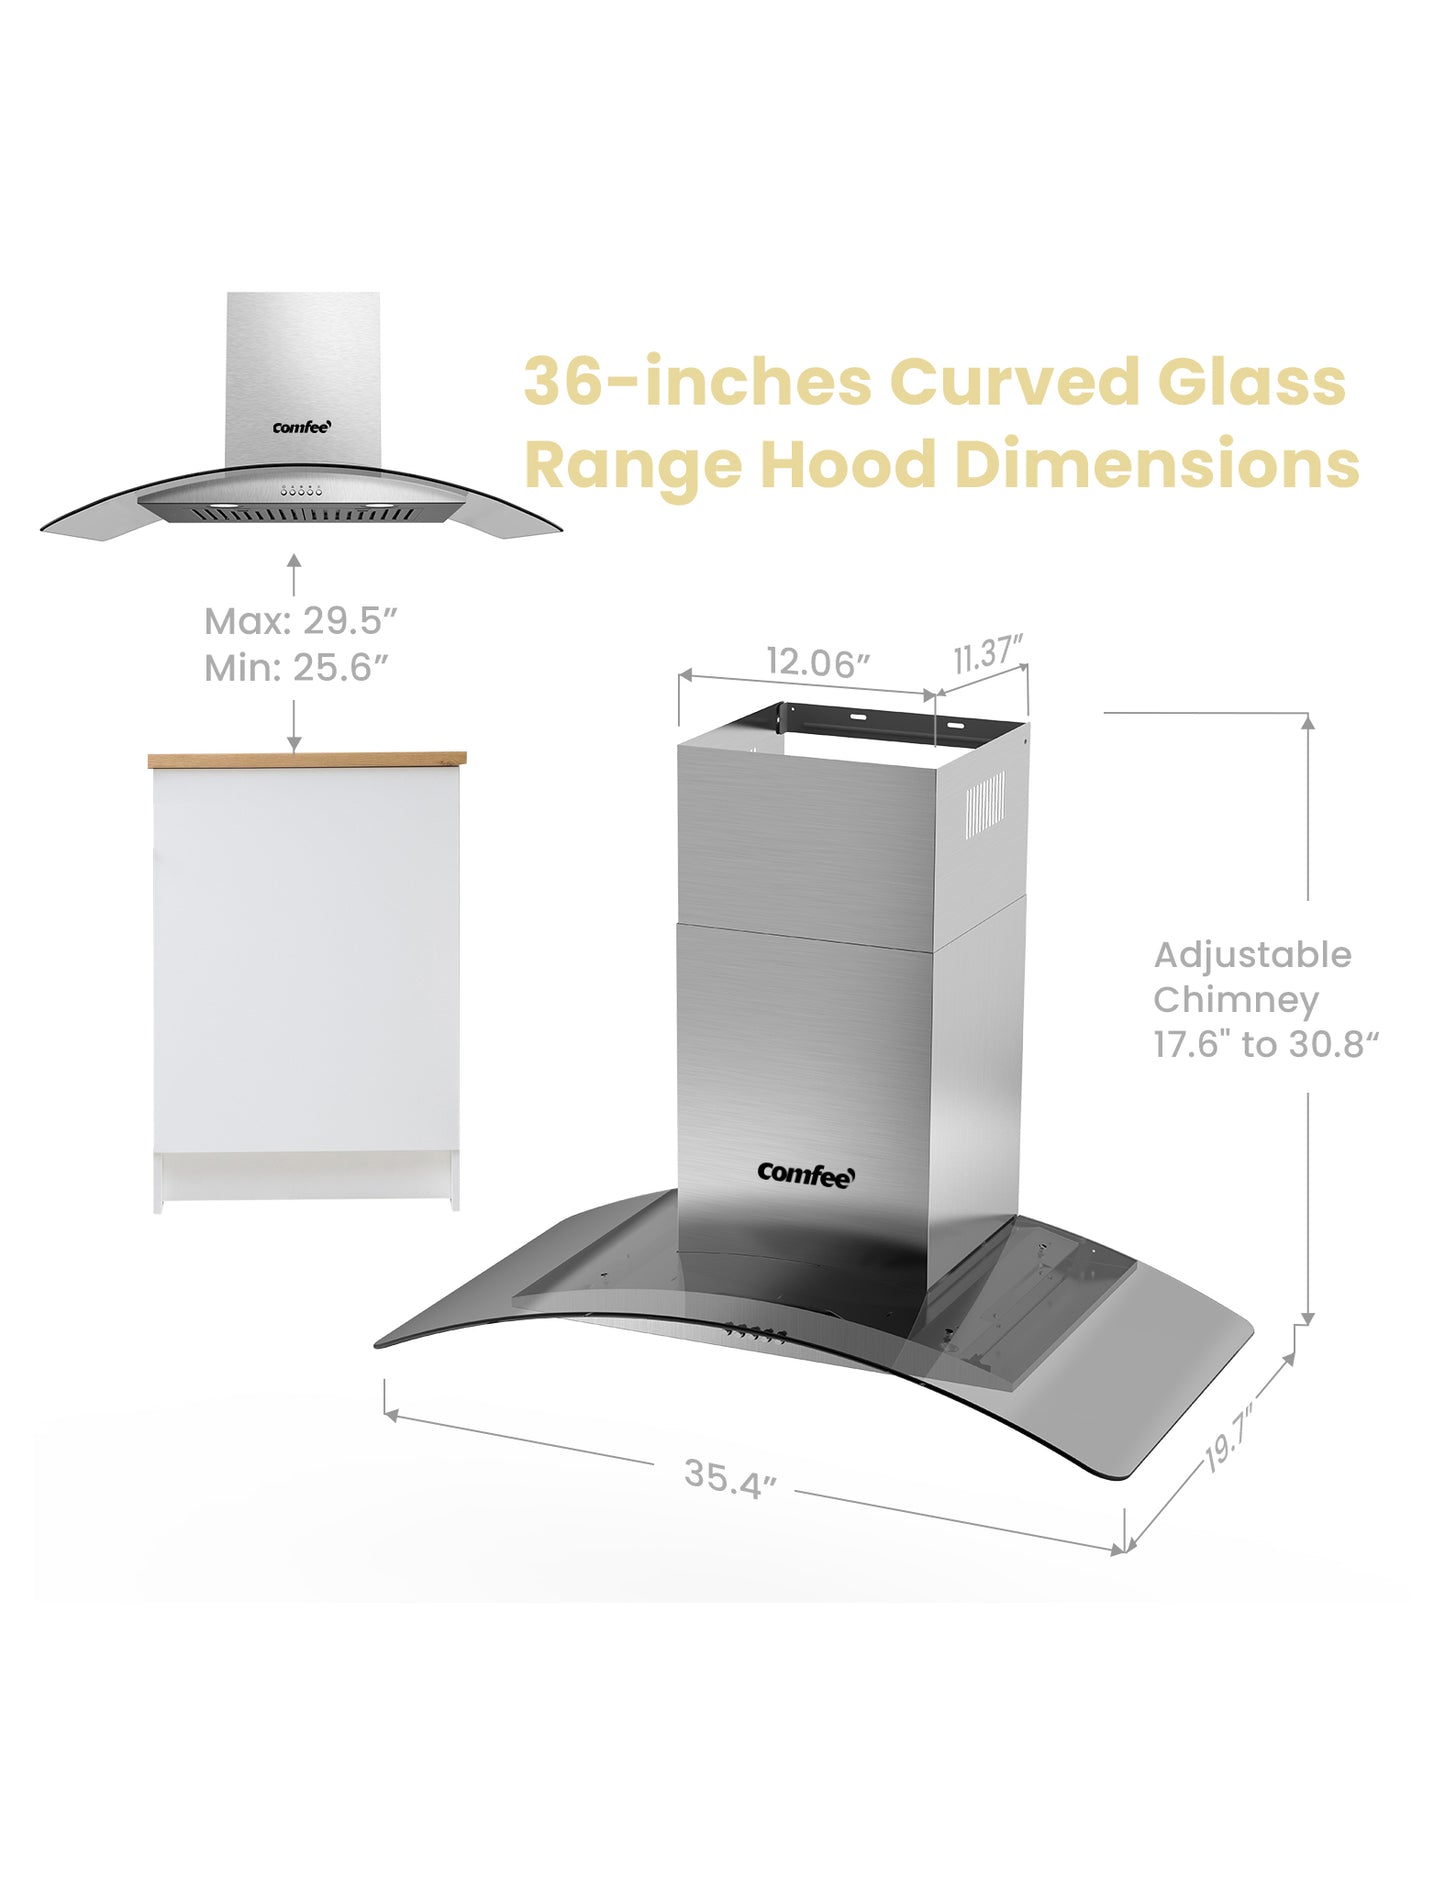 size dimensions of the comfee curved glass range hood